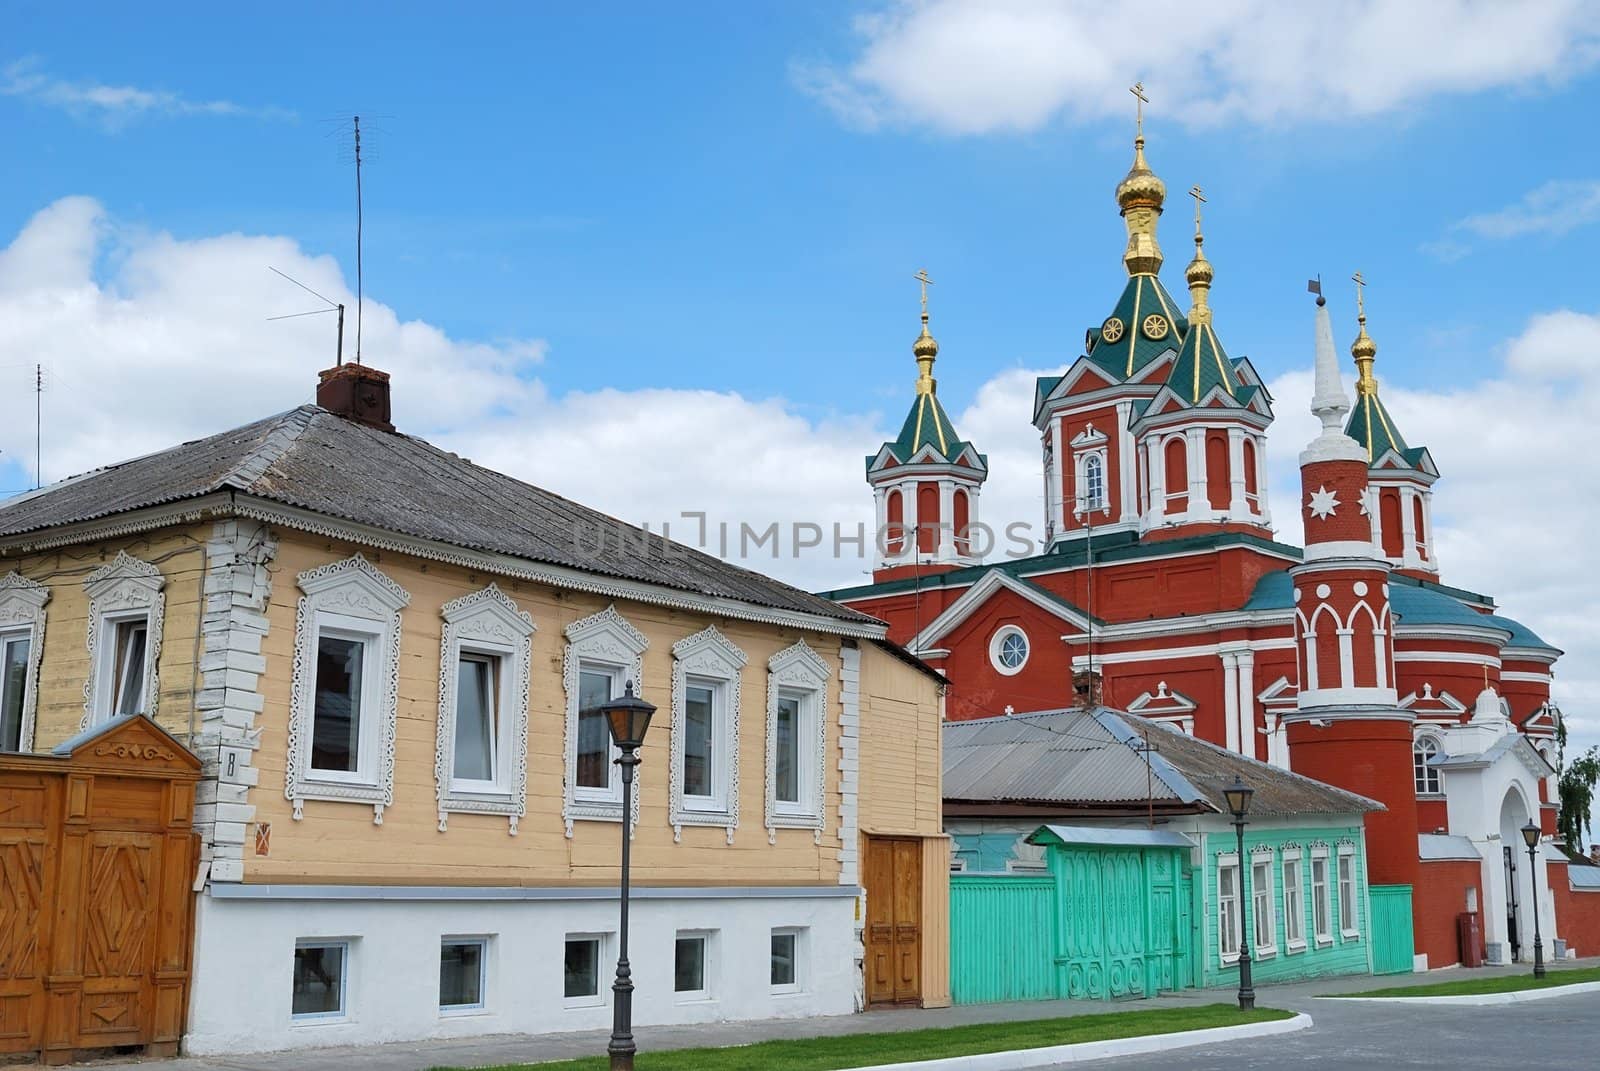 Old Russian town by svetico